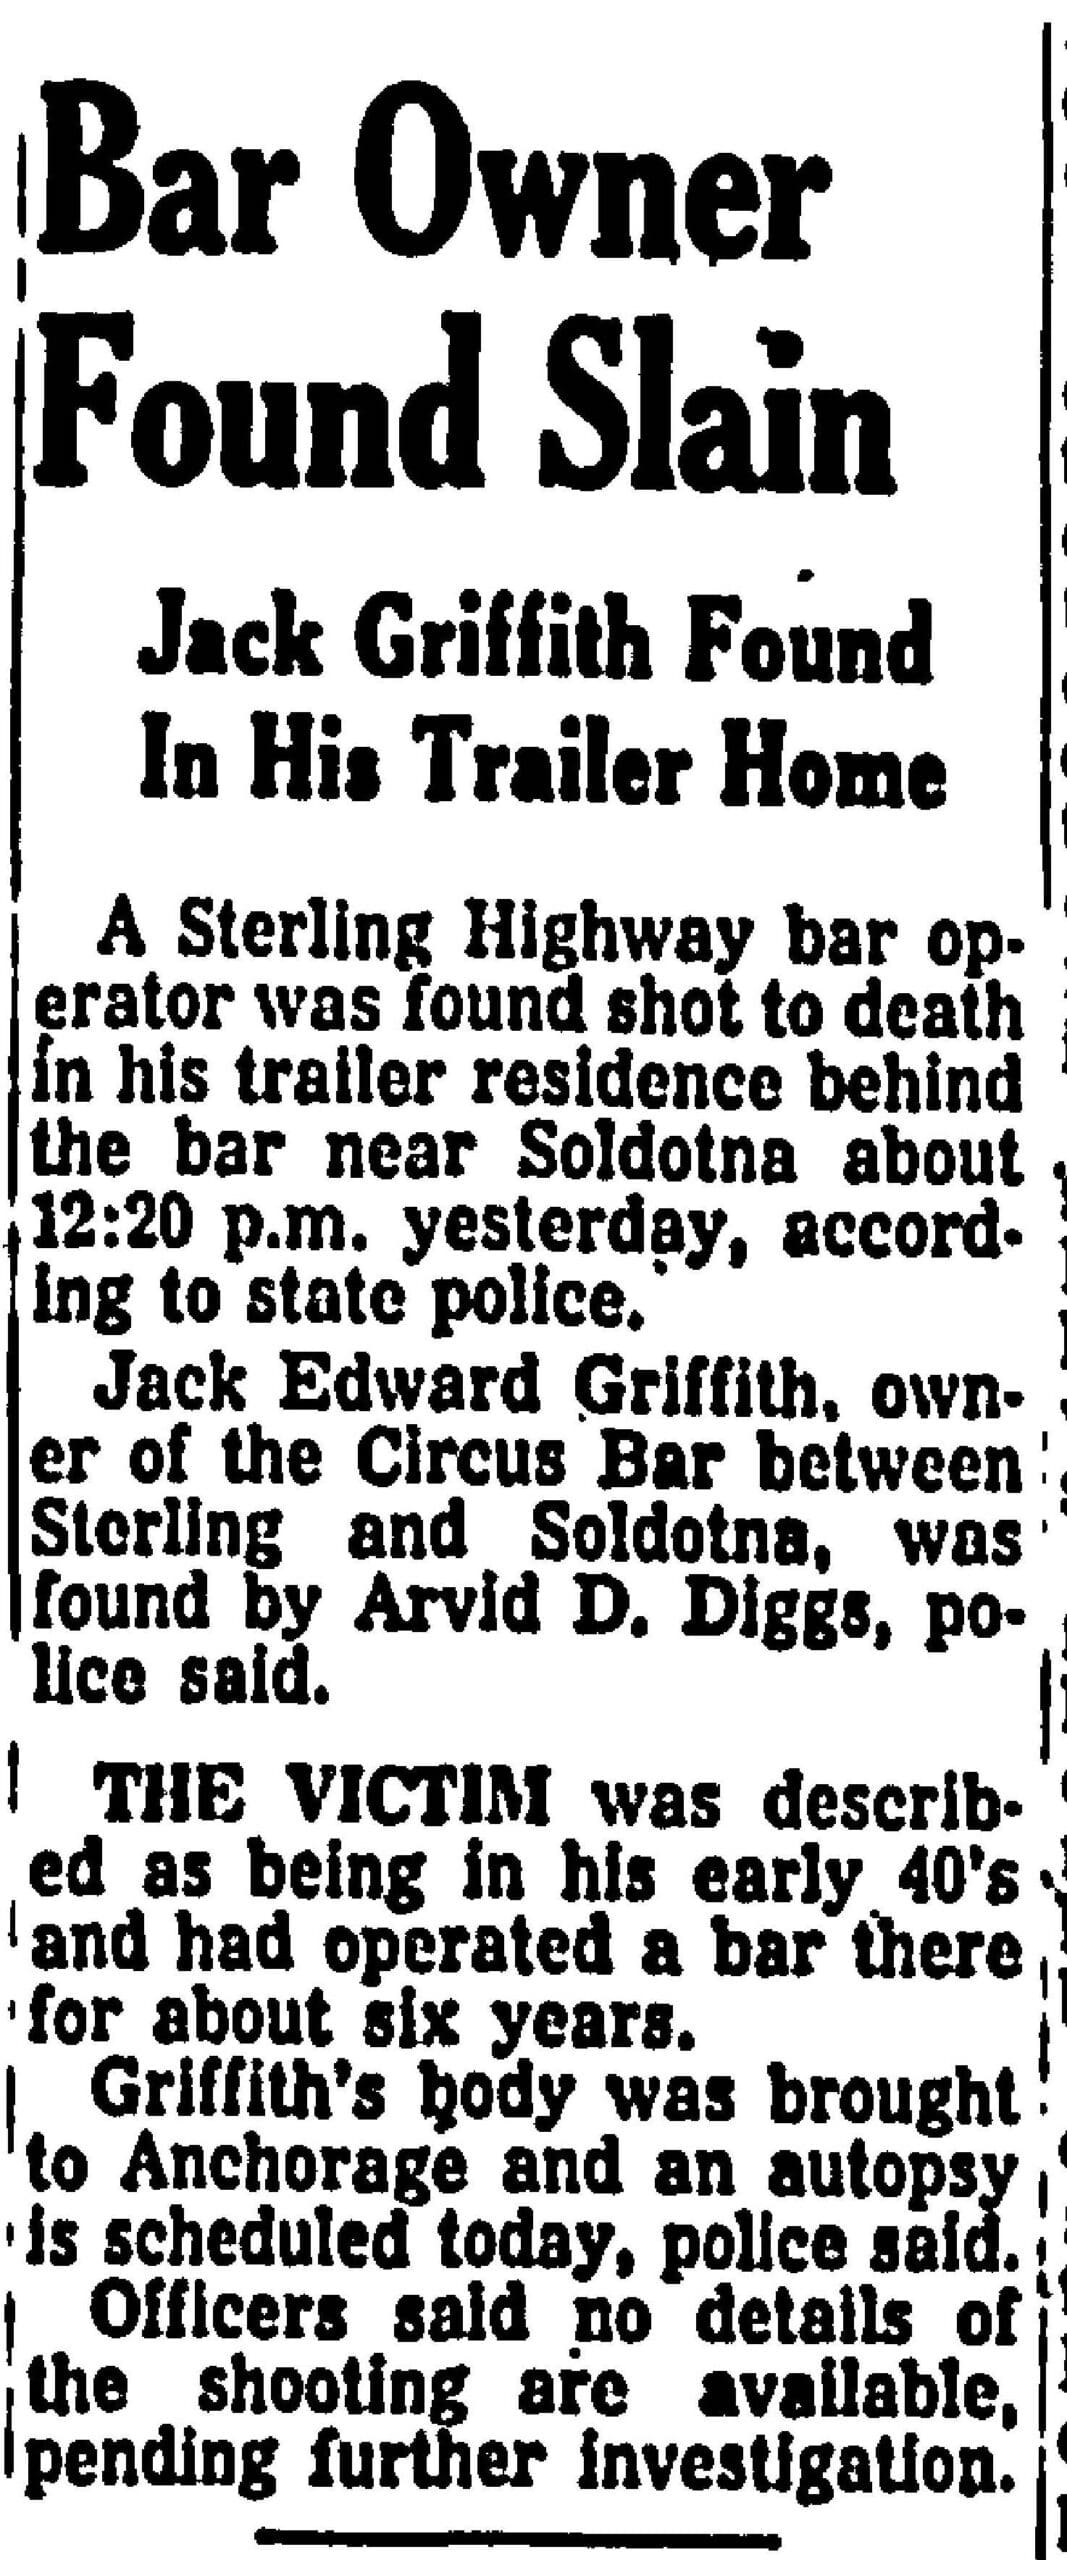 Article from the Anchorage Daily Times on Oct. 9, 1961
The murder of Jack Griffiths prompted an investigation that led within a few days to the arrest of a Kasilof man named James Franklin Bush.